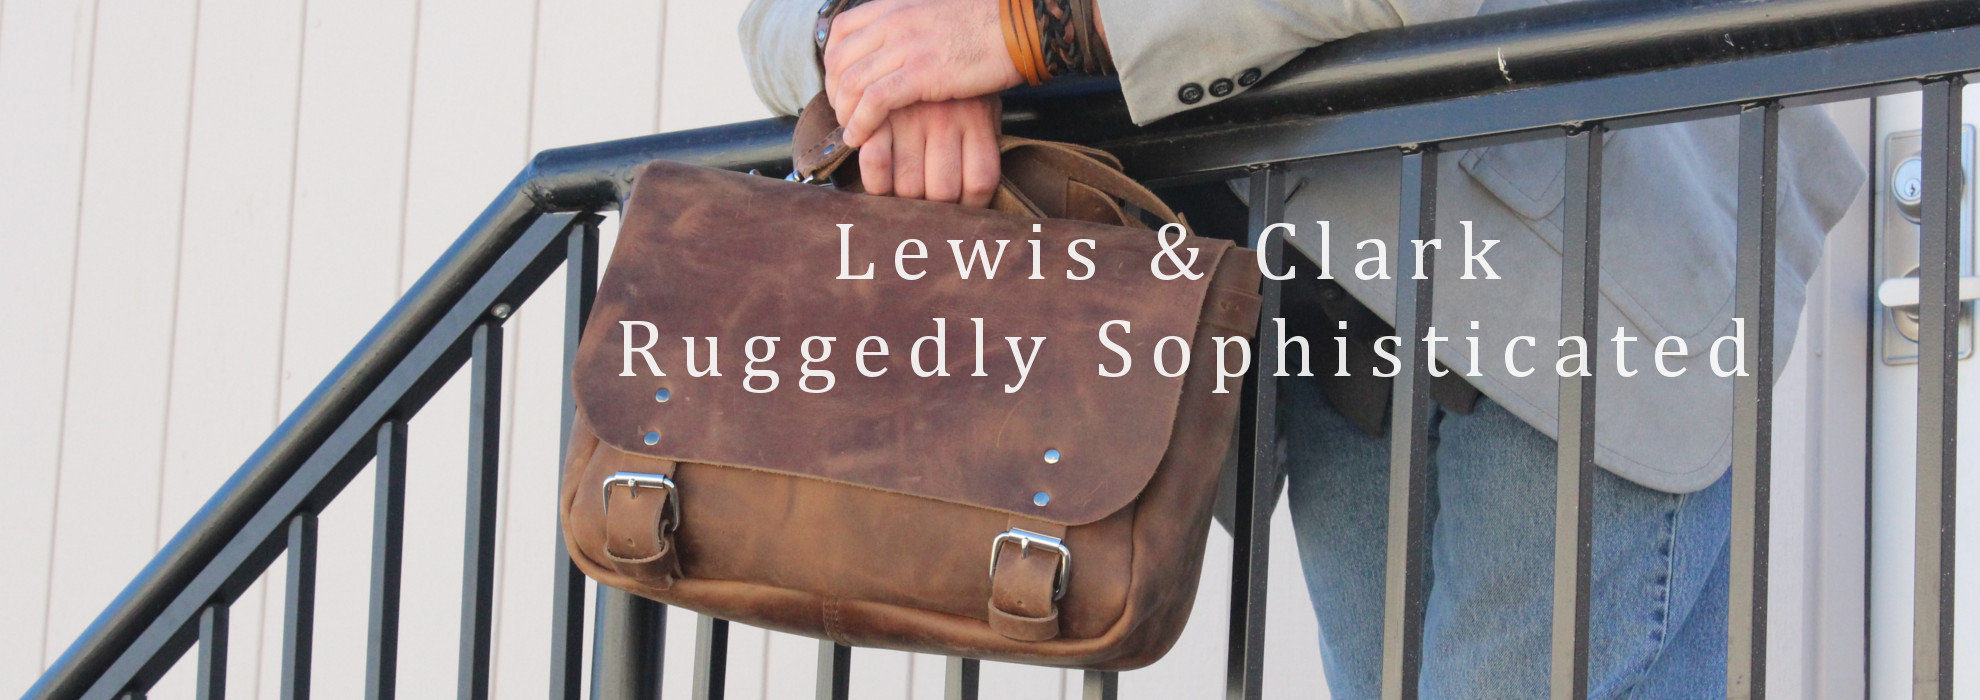 History of The Leather Duffle Bag - Copper River Bag Co.